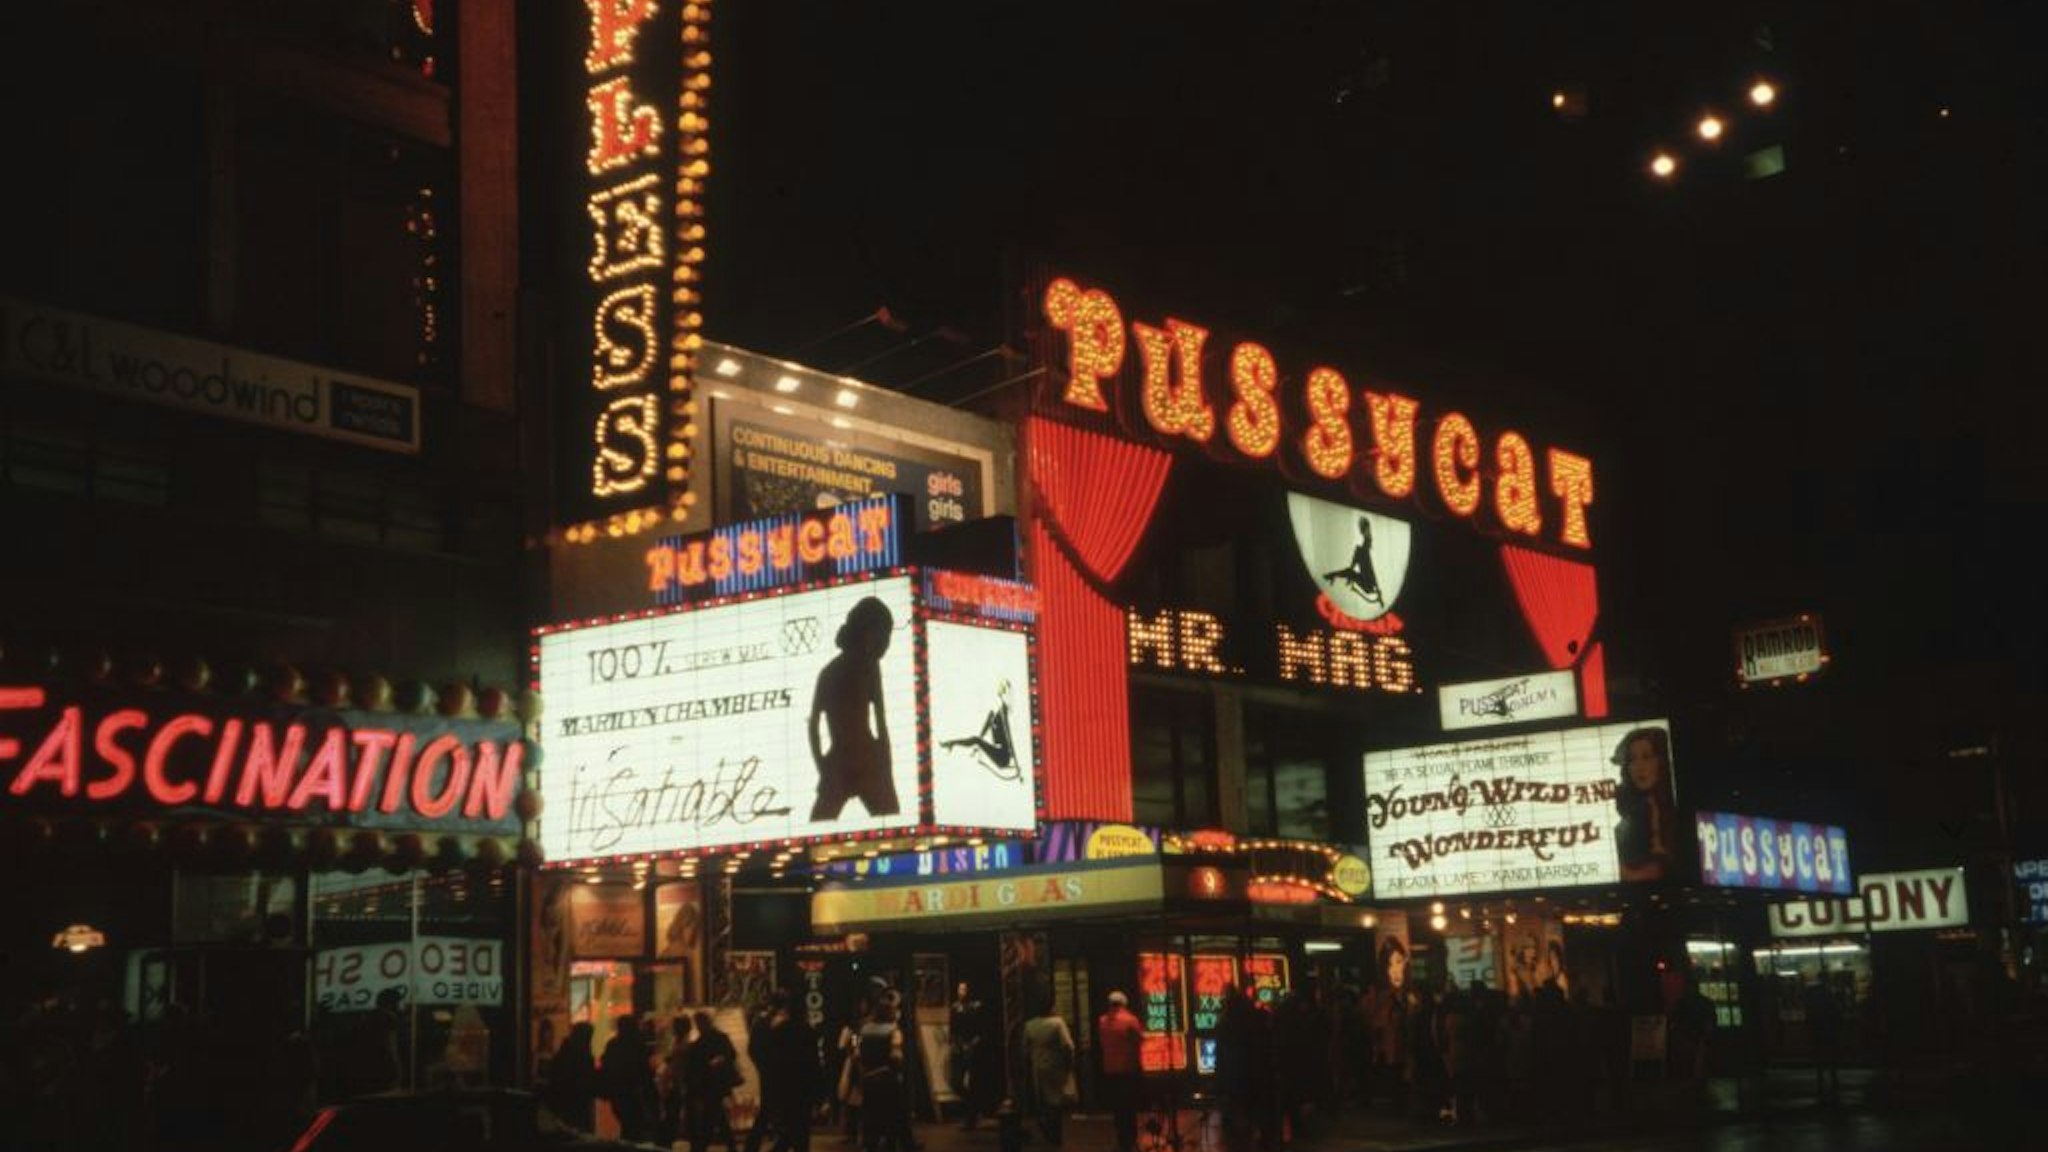 1980: Exterior nighttime view of the Pussycat, an X-rated movie theater on 42nd Street in Times Square, New York City. The marquee advertises porn actor Marilyn Chambers in director Stu Segall's film, 'Insatiable.' (Photo by David Herman/Hulton Archive/Getty Images)